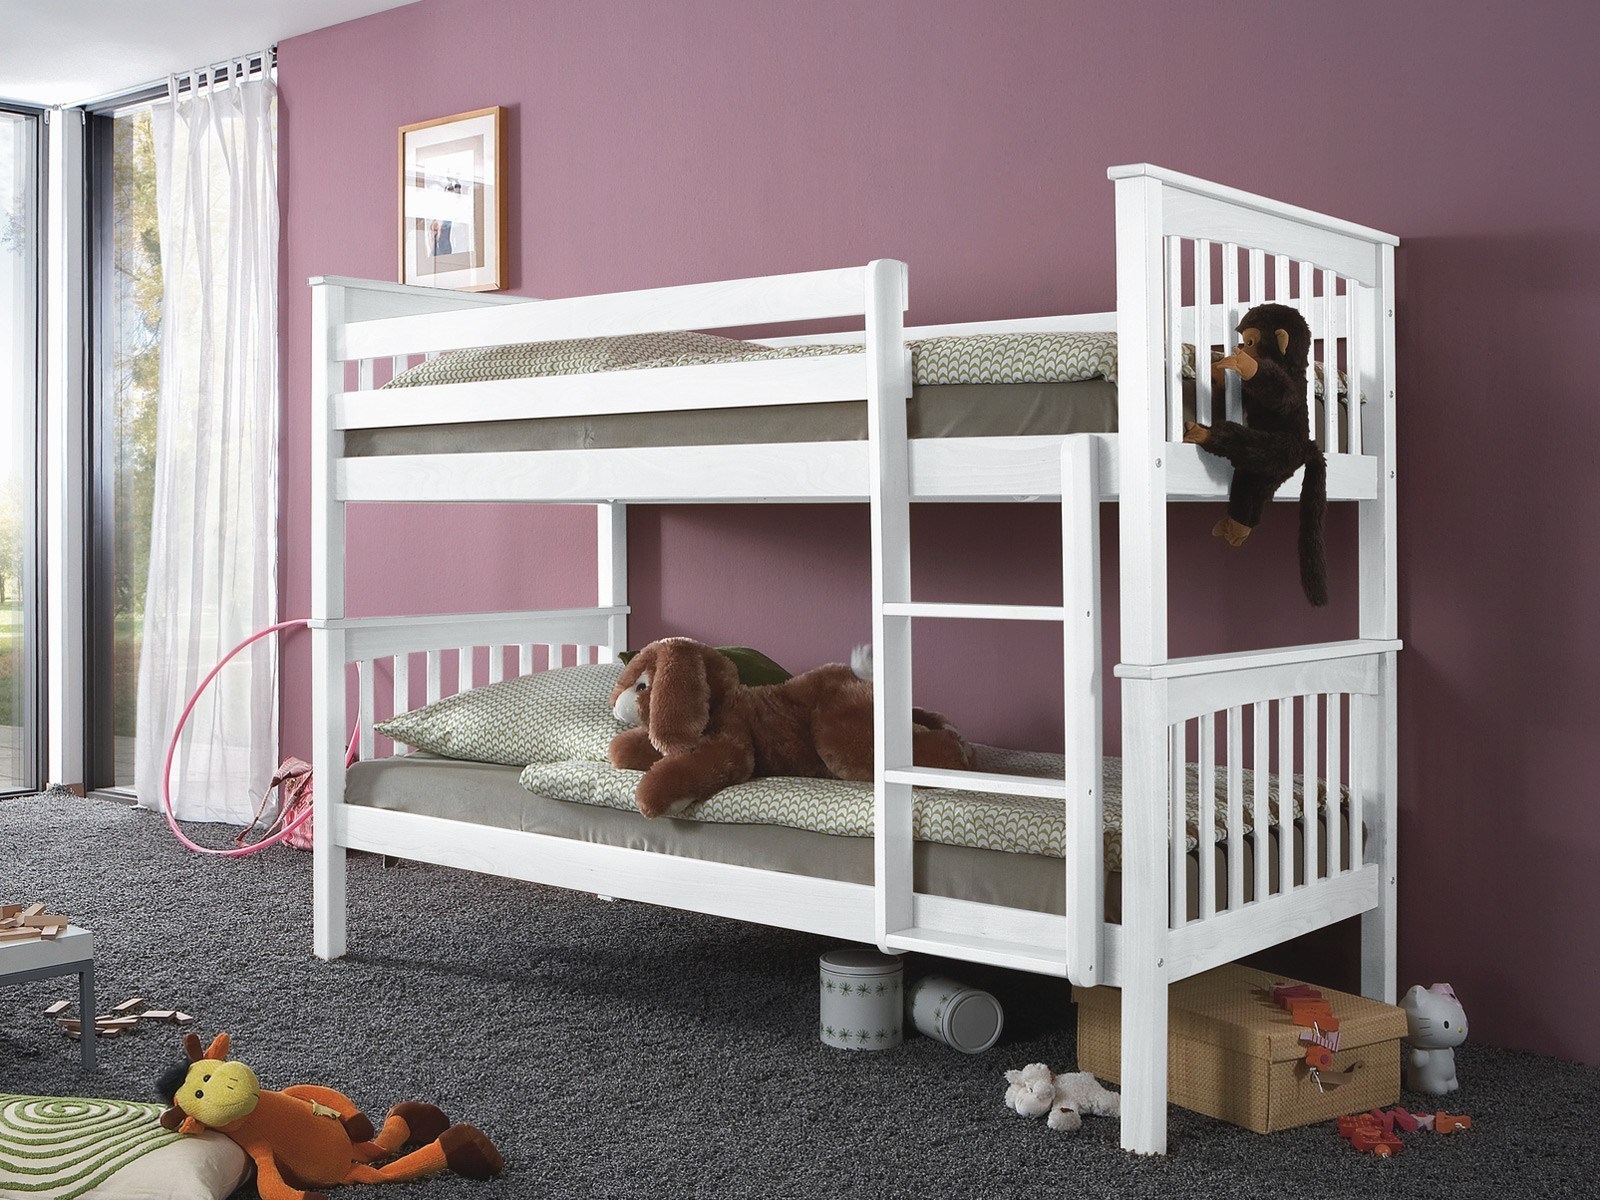 Rails and ladder double decker bed